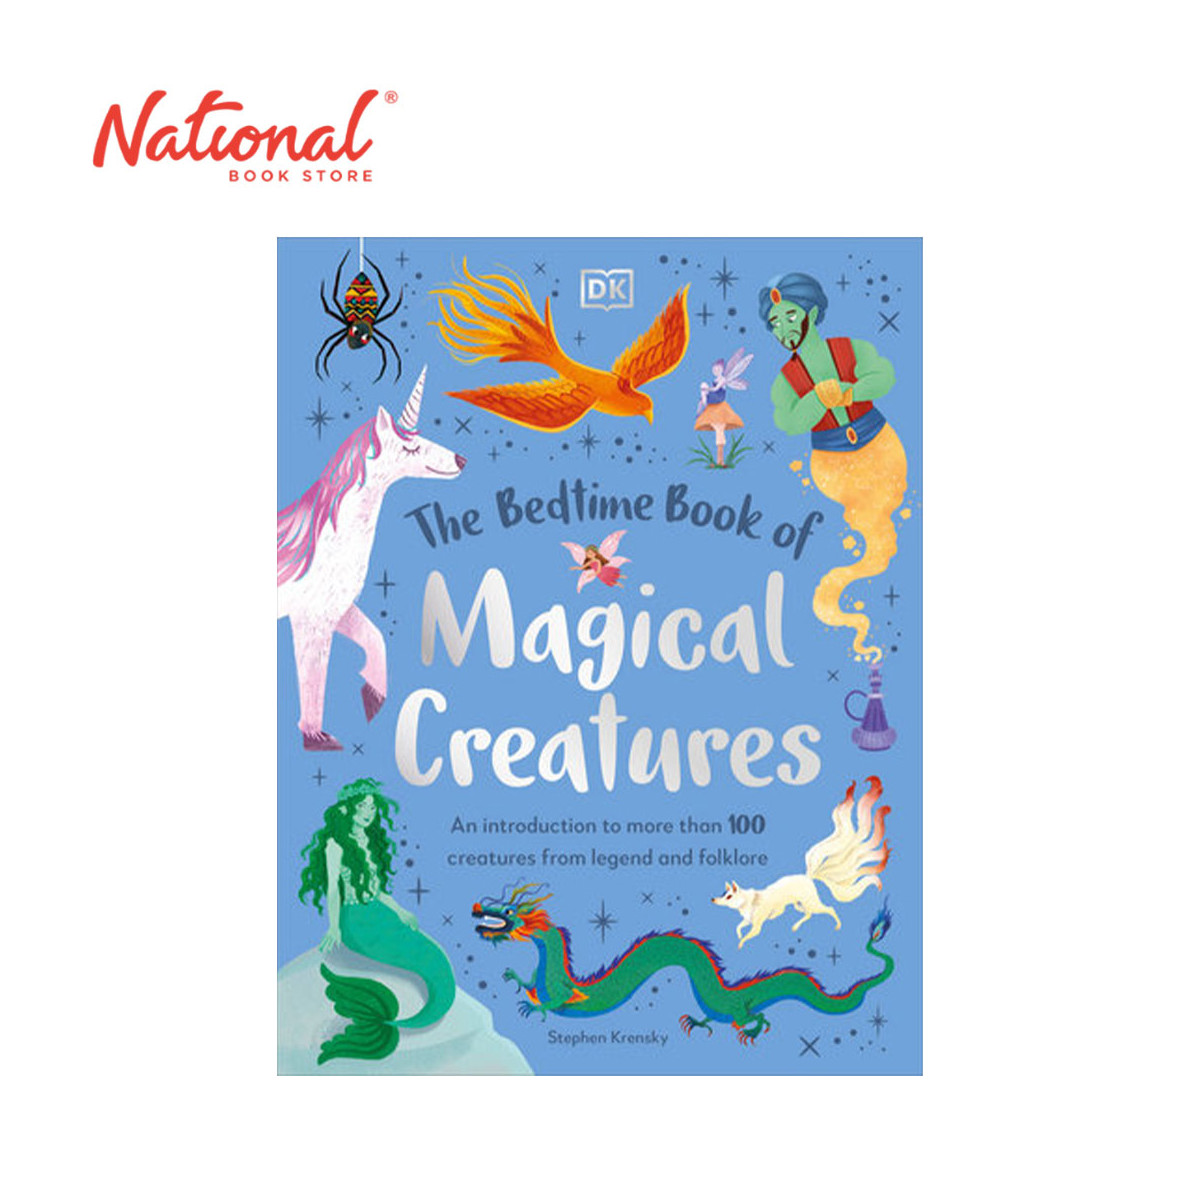 *PRE-ORDER* The Bedtime Book Of Magical Creatures by Stephen Krensky - Hardcover - Children's Reference